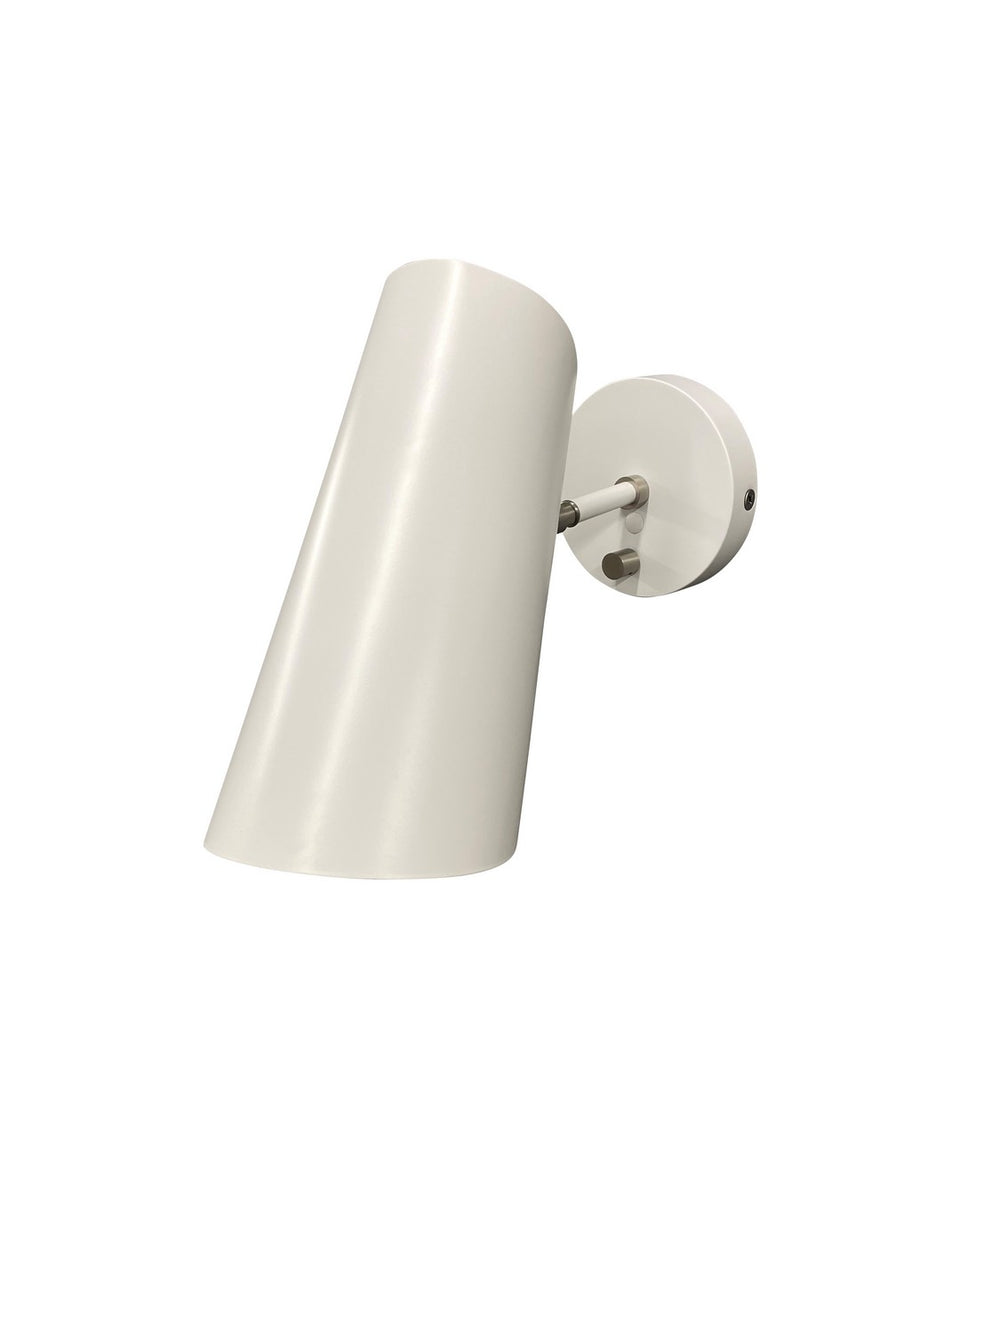 House of Troy - L325-WTSN - LED Wall Sconce - Logan - White/Satin Nickel